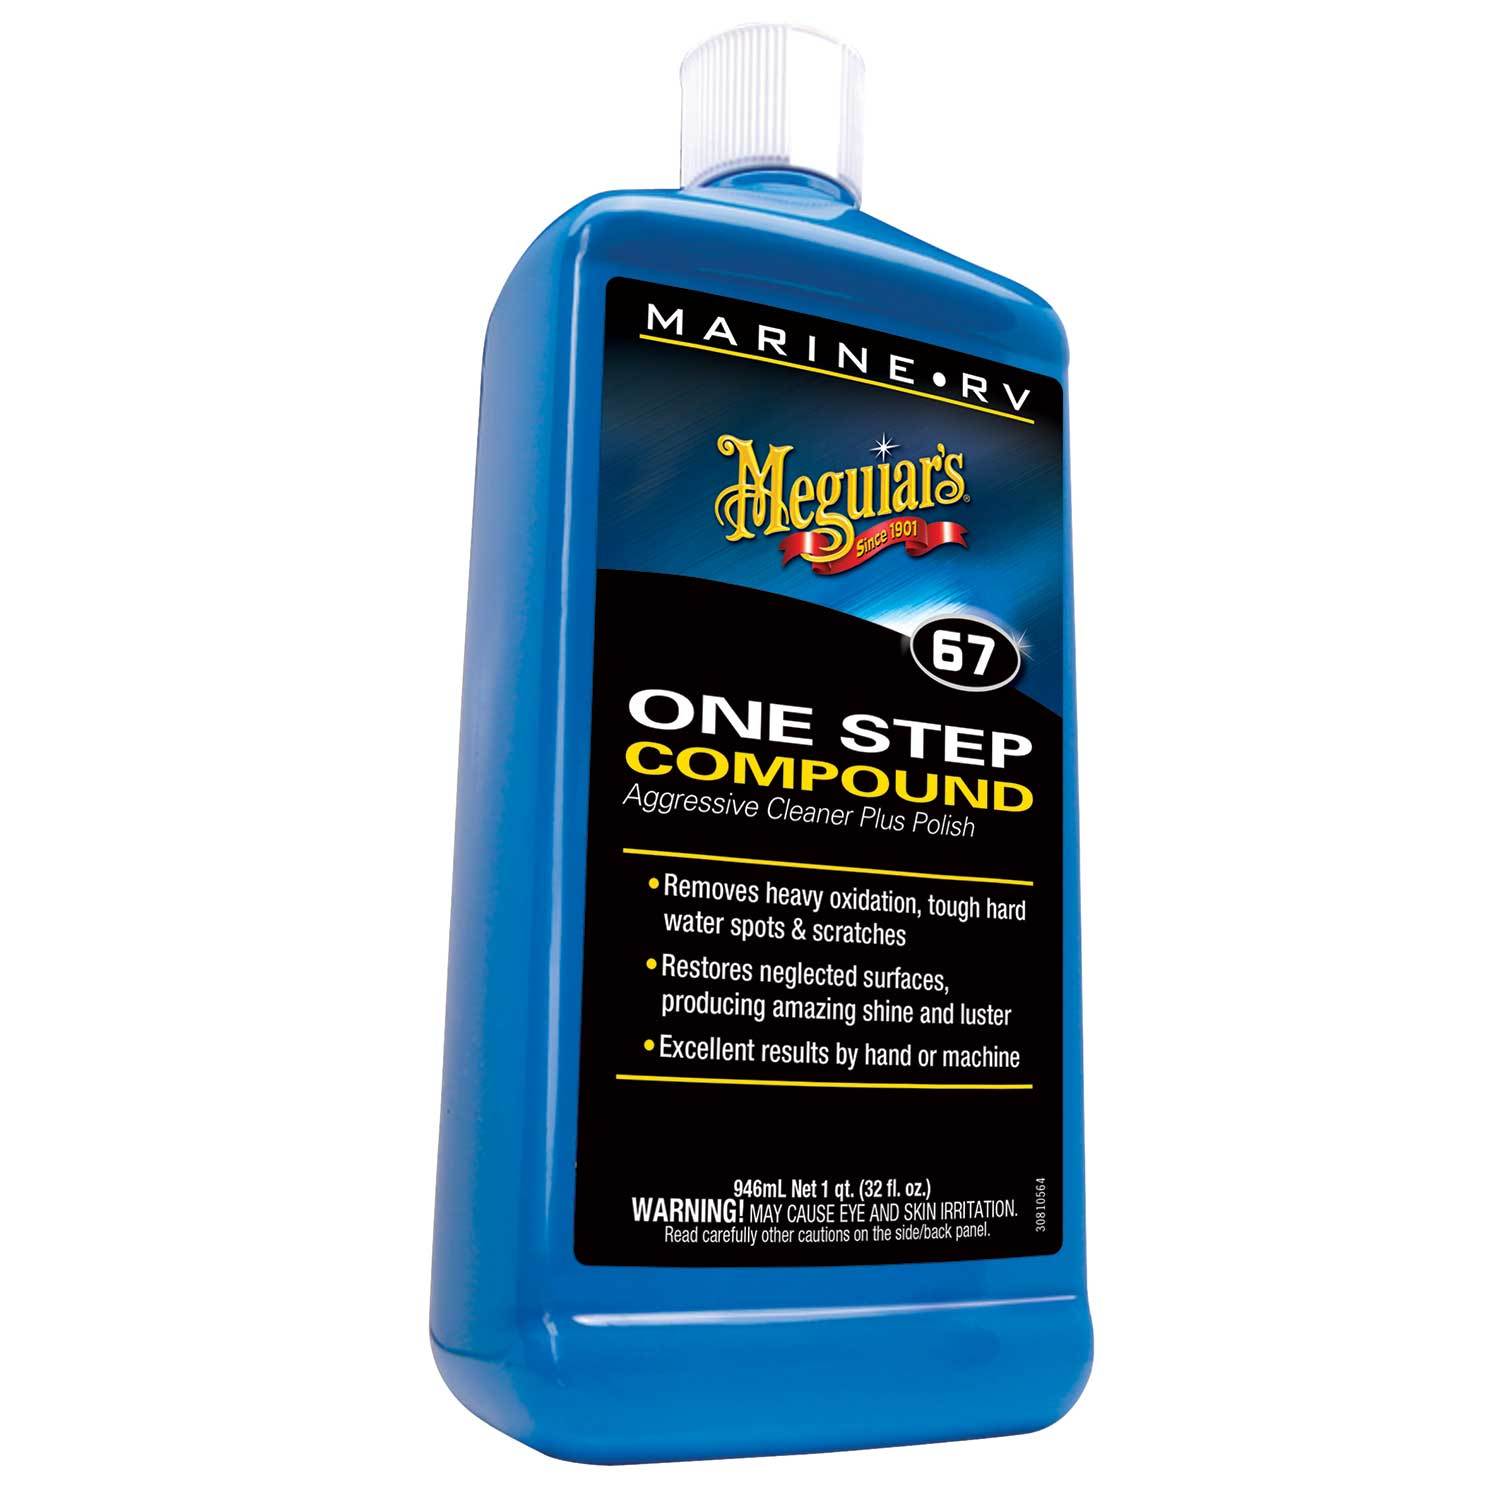 Get your car ready for spring with this Meguiar's Wash & Wax Kit